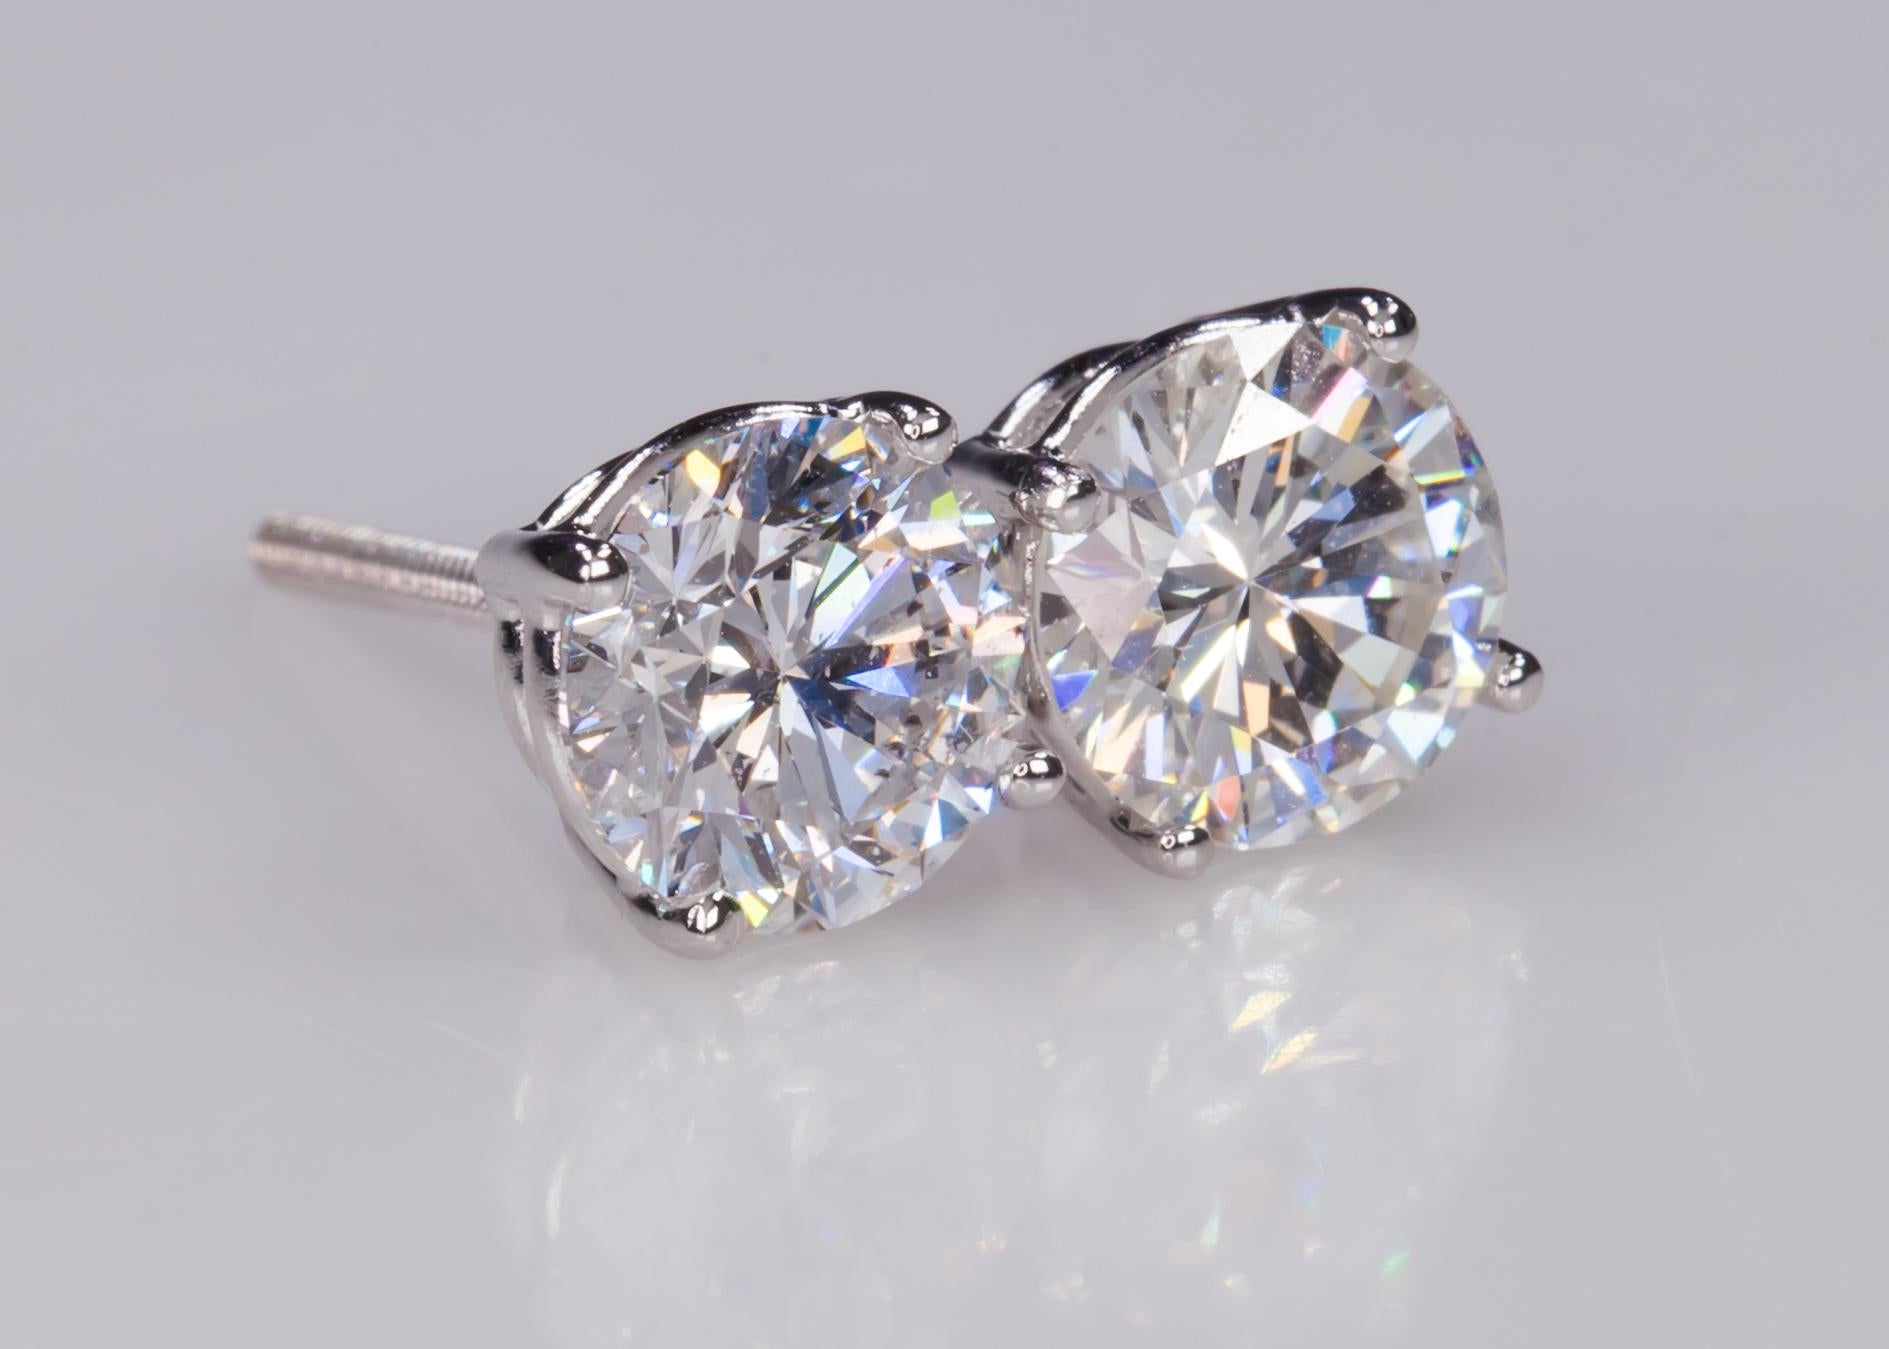 Beautiful Round Diamond Stud Earrings
Four-Prong Settings in 14k White Gold
Total Carat Weight = 2.06 Cts
Color: G - H
Clarity: SI1
Dimensions of Stones:
6.31mm x 4.03mm 
6.53mm x 3.97mm
Total Mass = 1.7 grams
Gorgeous Pieces!